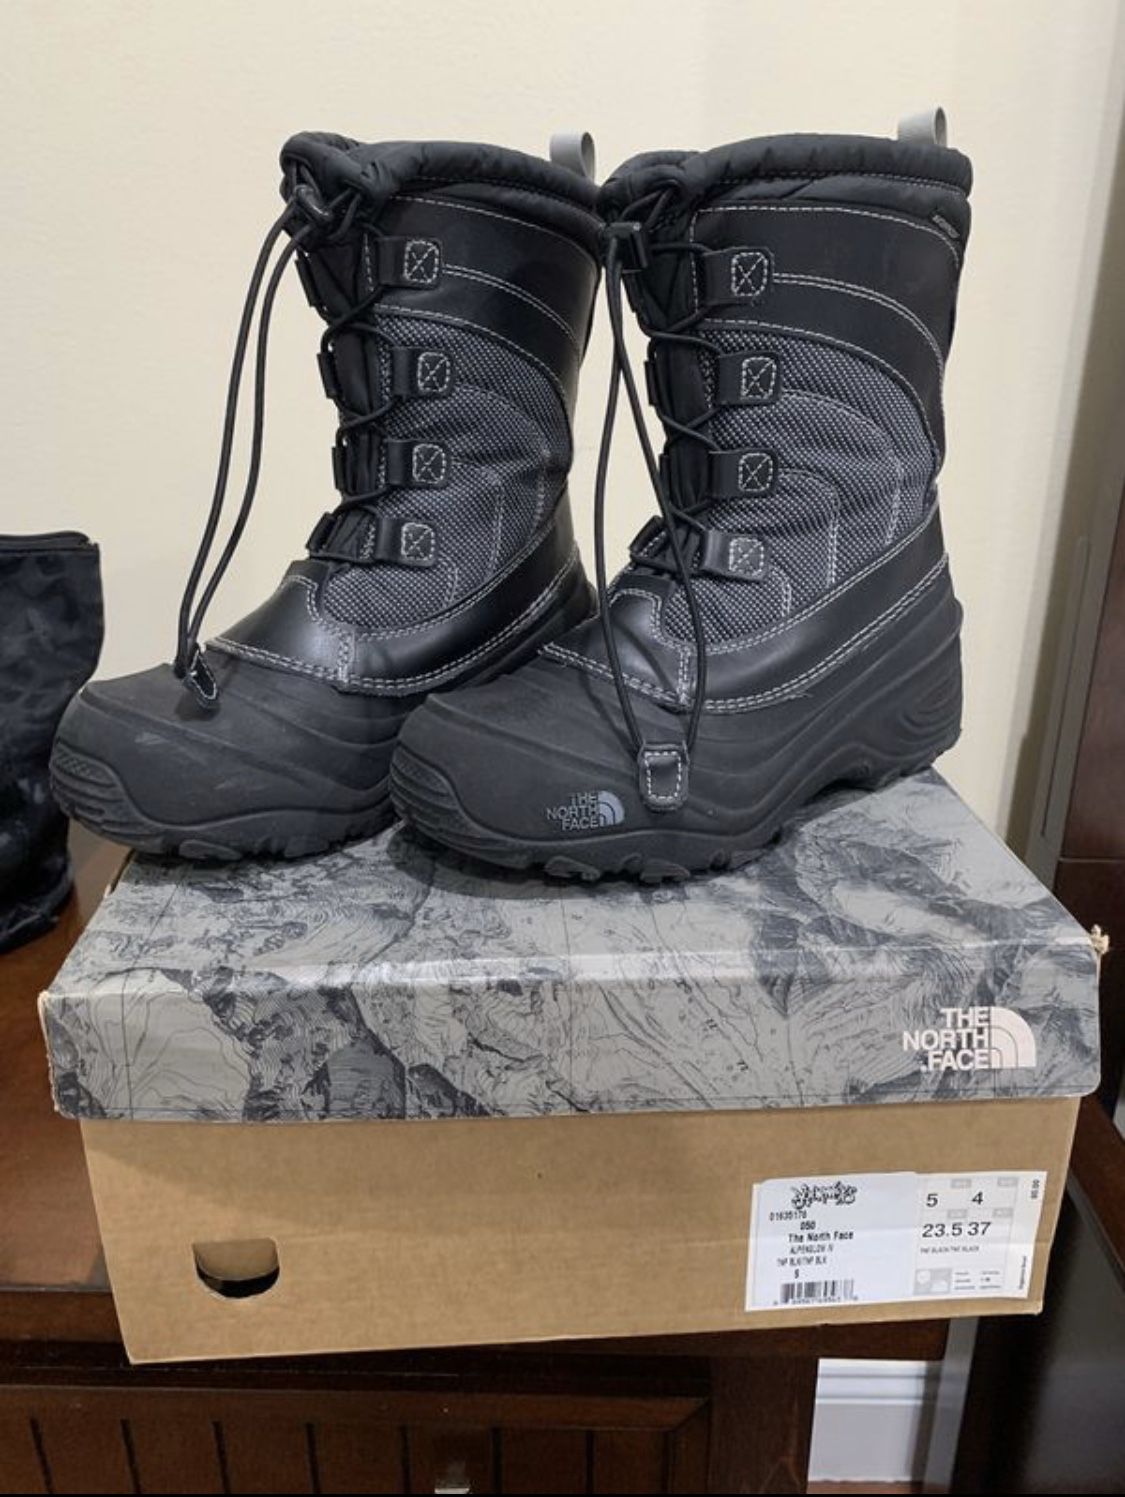 Kids north face winter/snow boots, size 5 $20